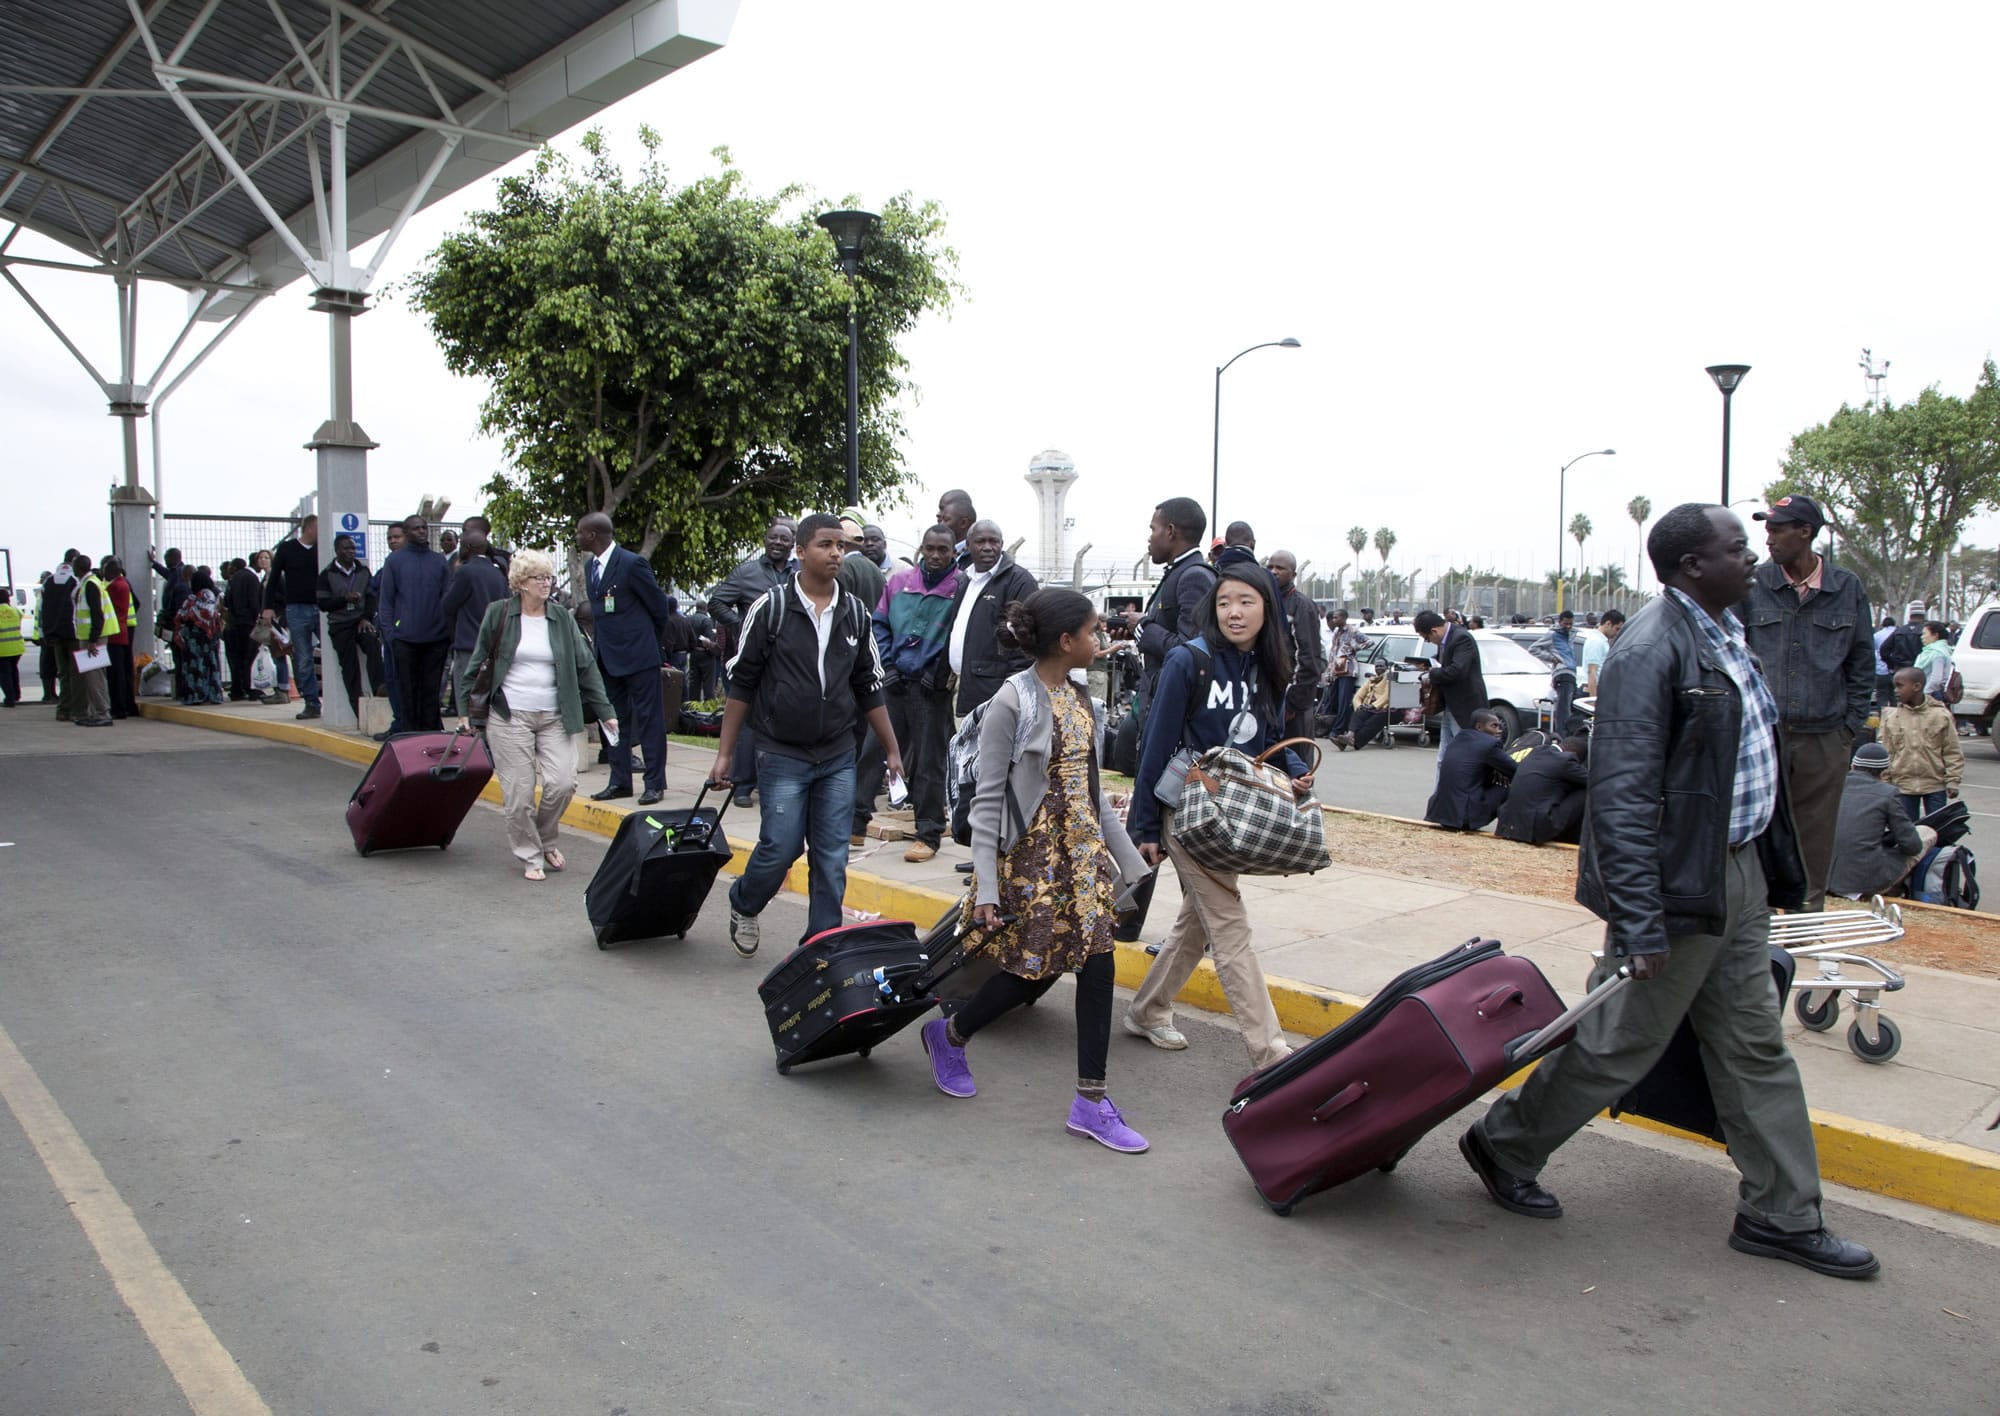 International passengers walk from the airport to be taken to the hotels, after the airport was closed and flights suspended after fire engulfed the International arrivals unit of Jomo Kenyatta International Airport, Nairobi, Kenya, on Wednesday.